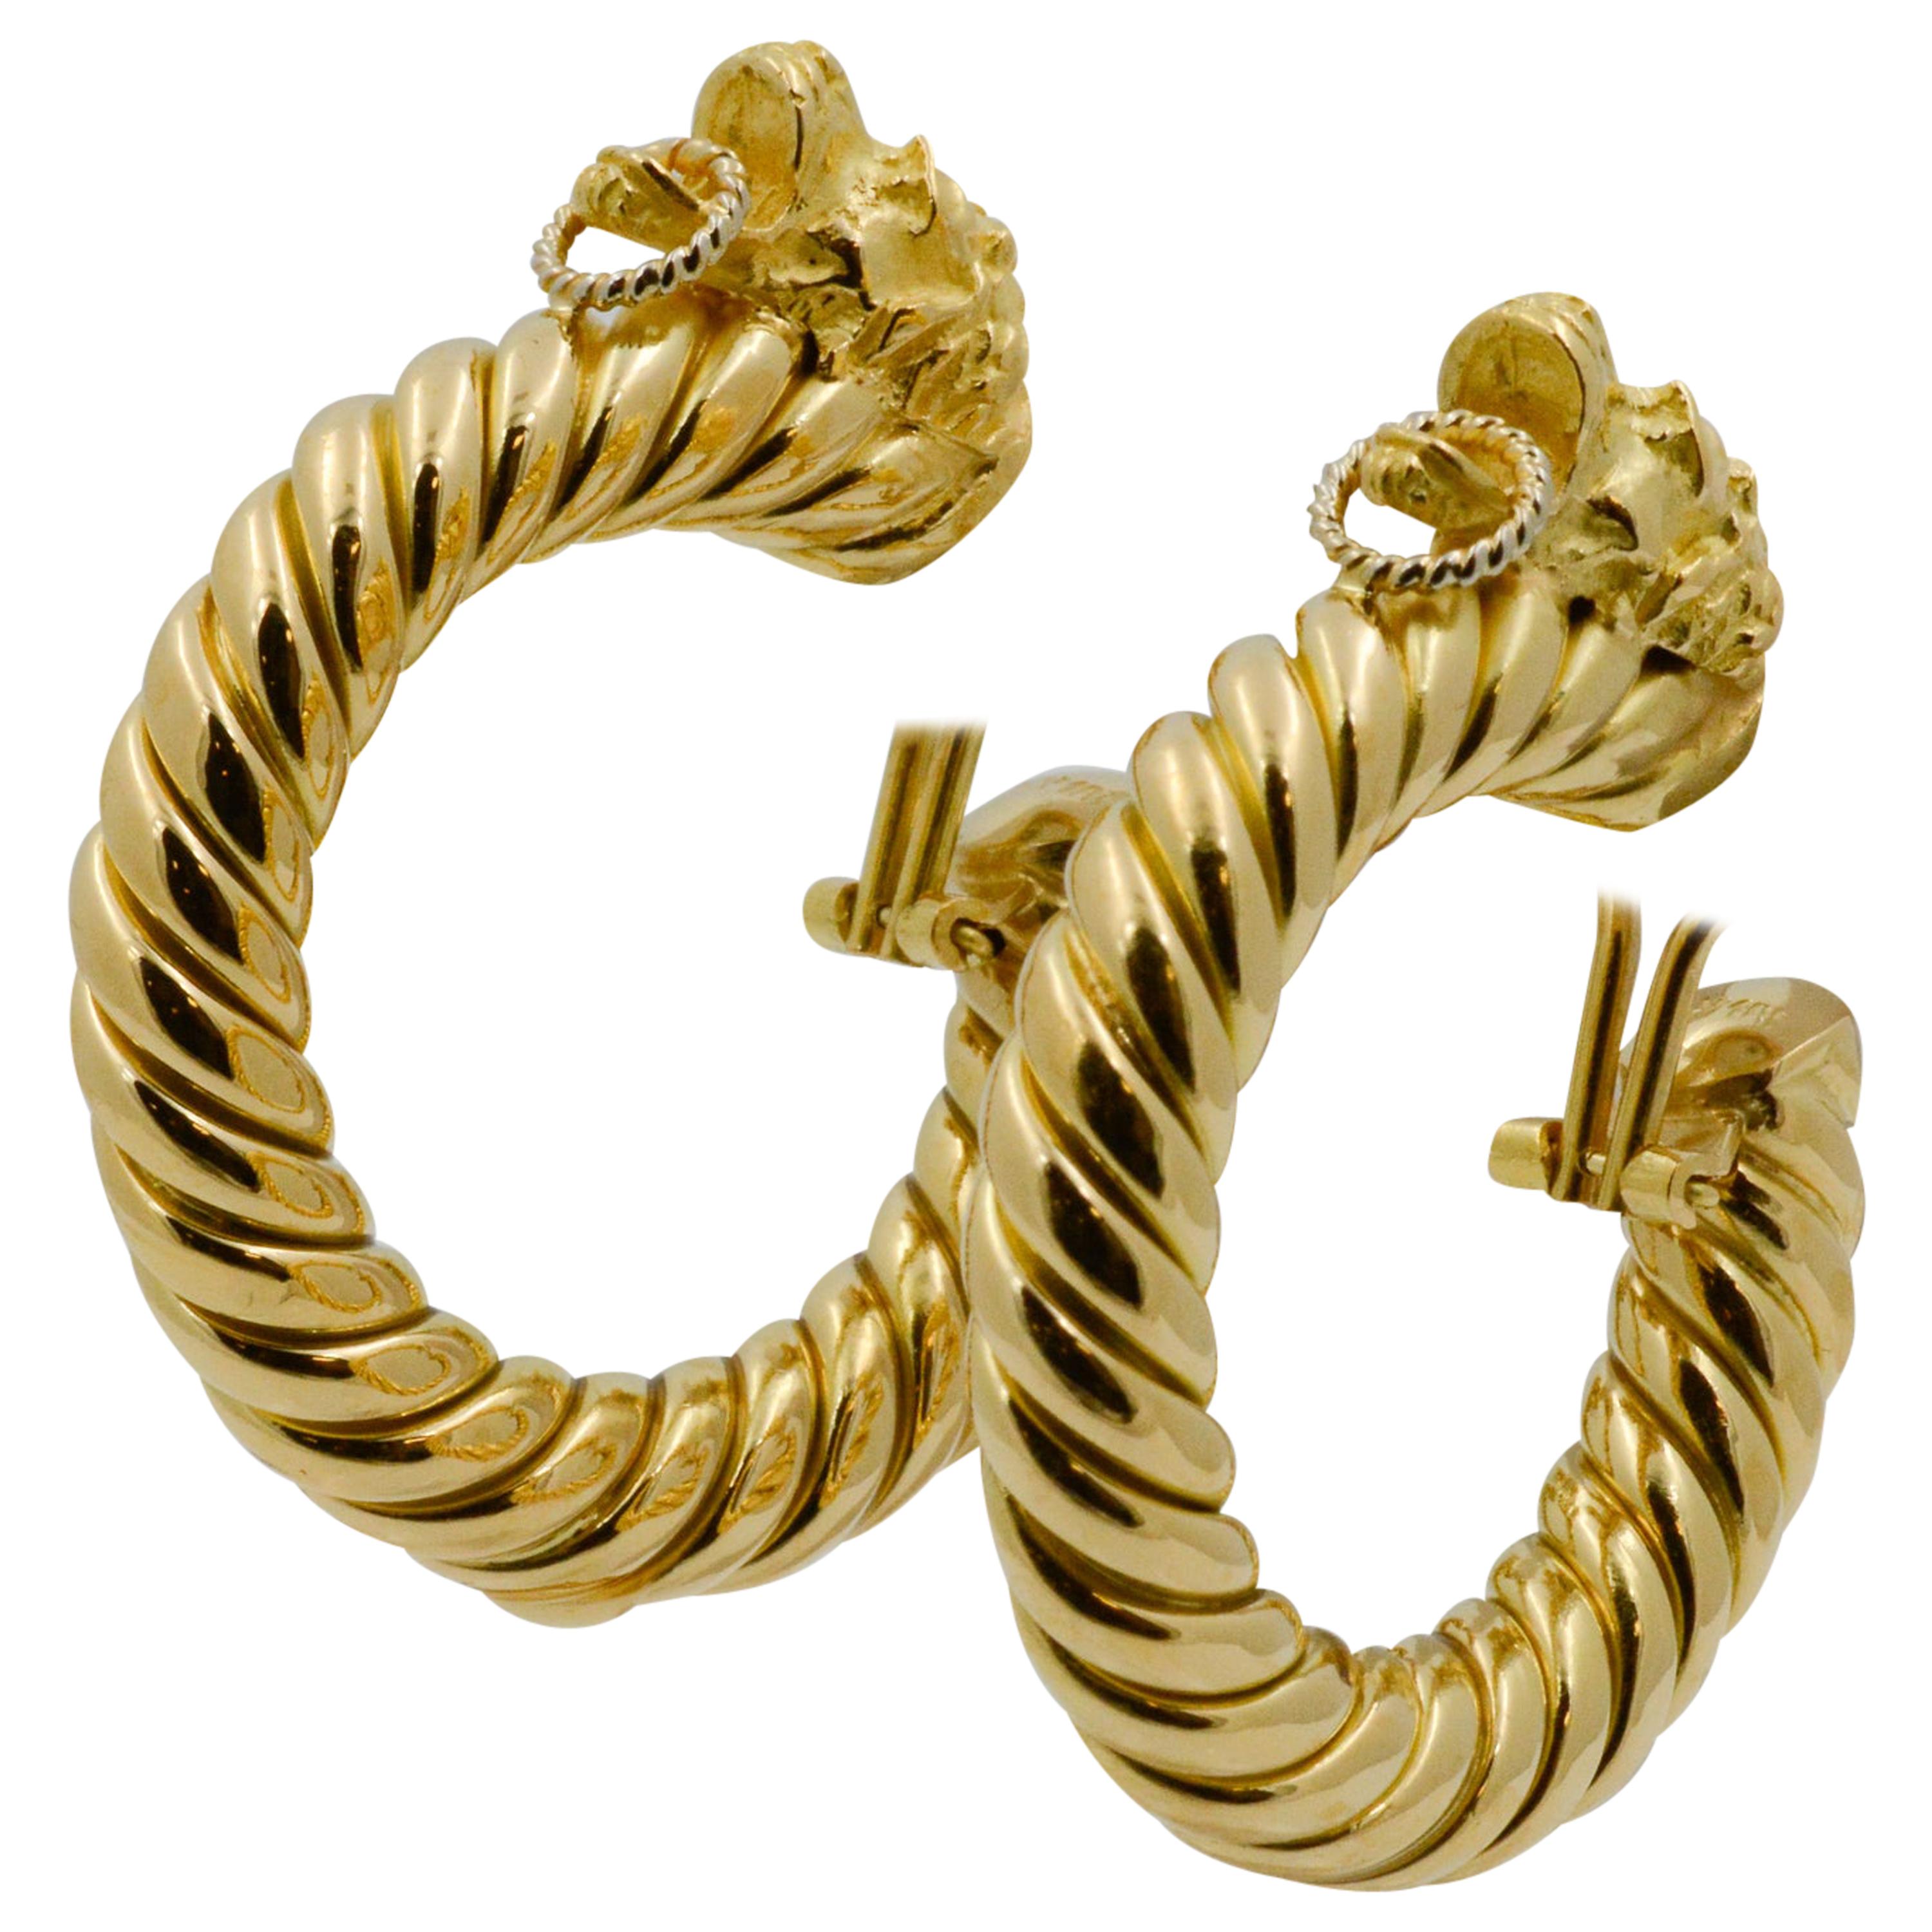 Exclusively from the Eiseman Estate Jewelry Collection, these 18k yellow gold earrings feature a ram head and rope design throughout the hoop. The earrings are stamped Italy Mecan. 